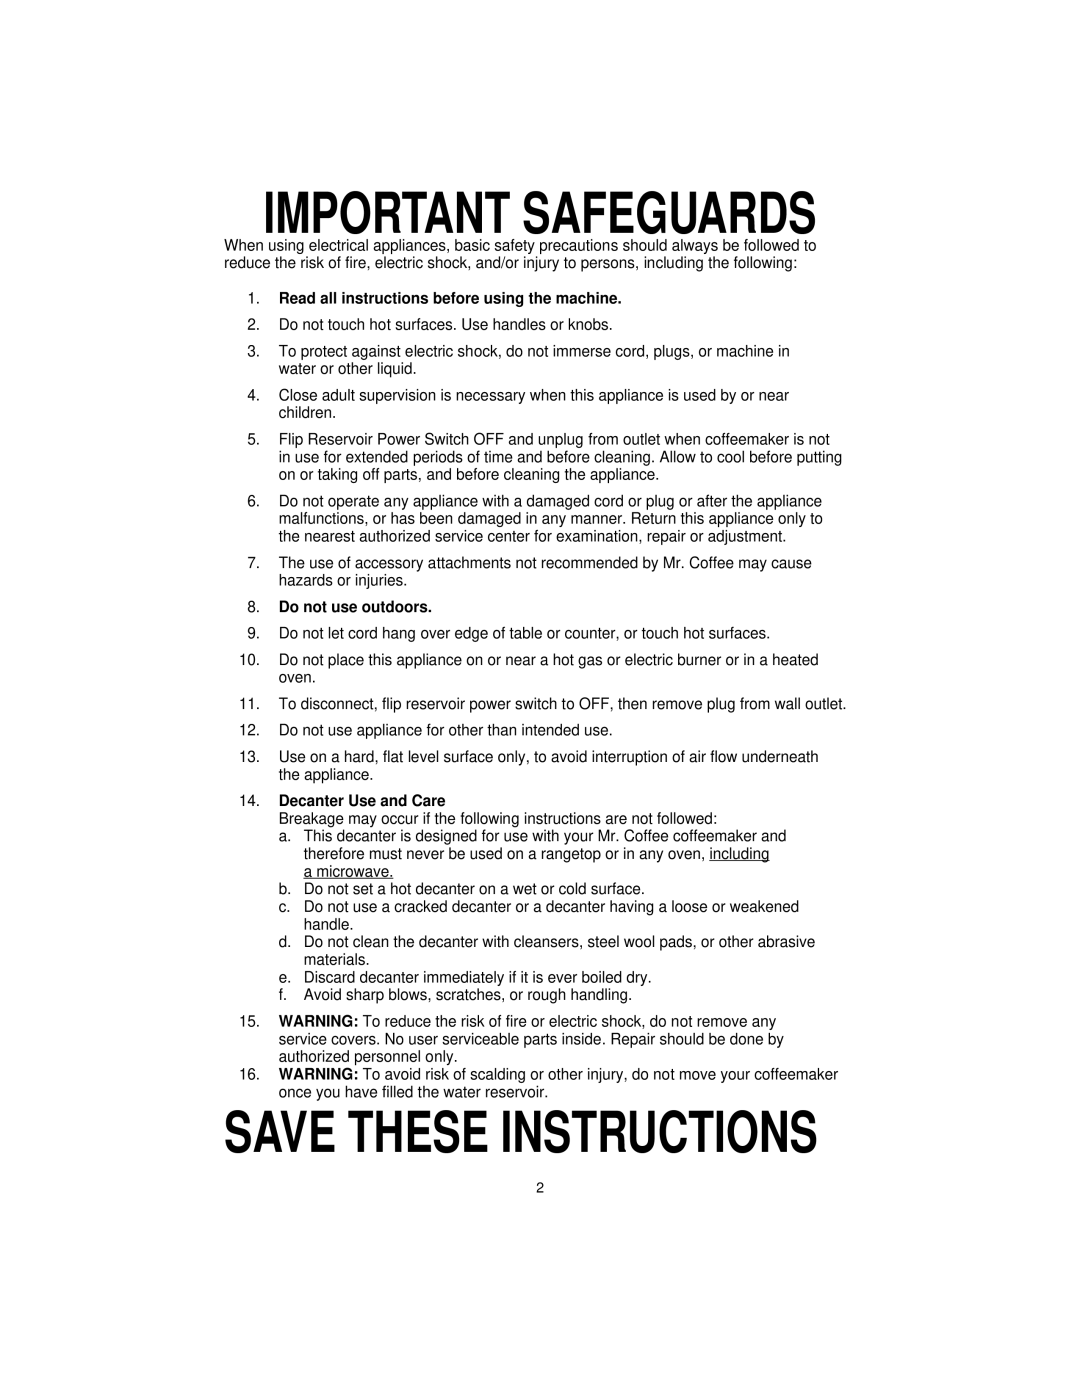 Mr. Coffee DSP10 manual Important Safeguards, Save These Instructions, Read all instructions before using the machine 